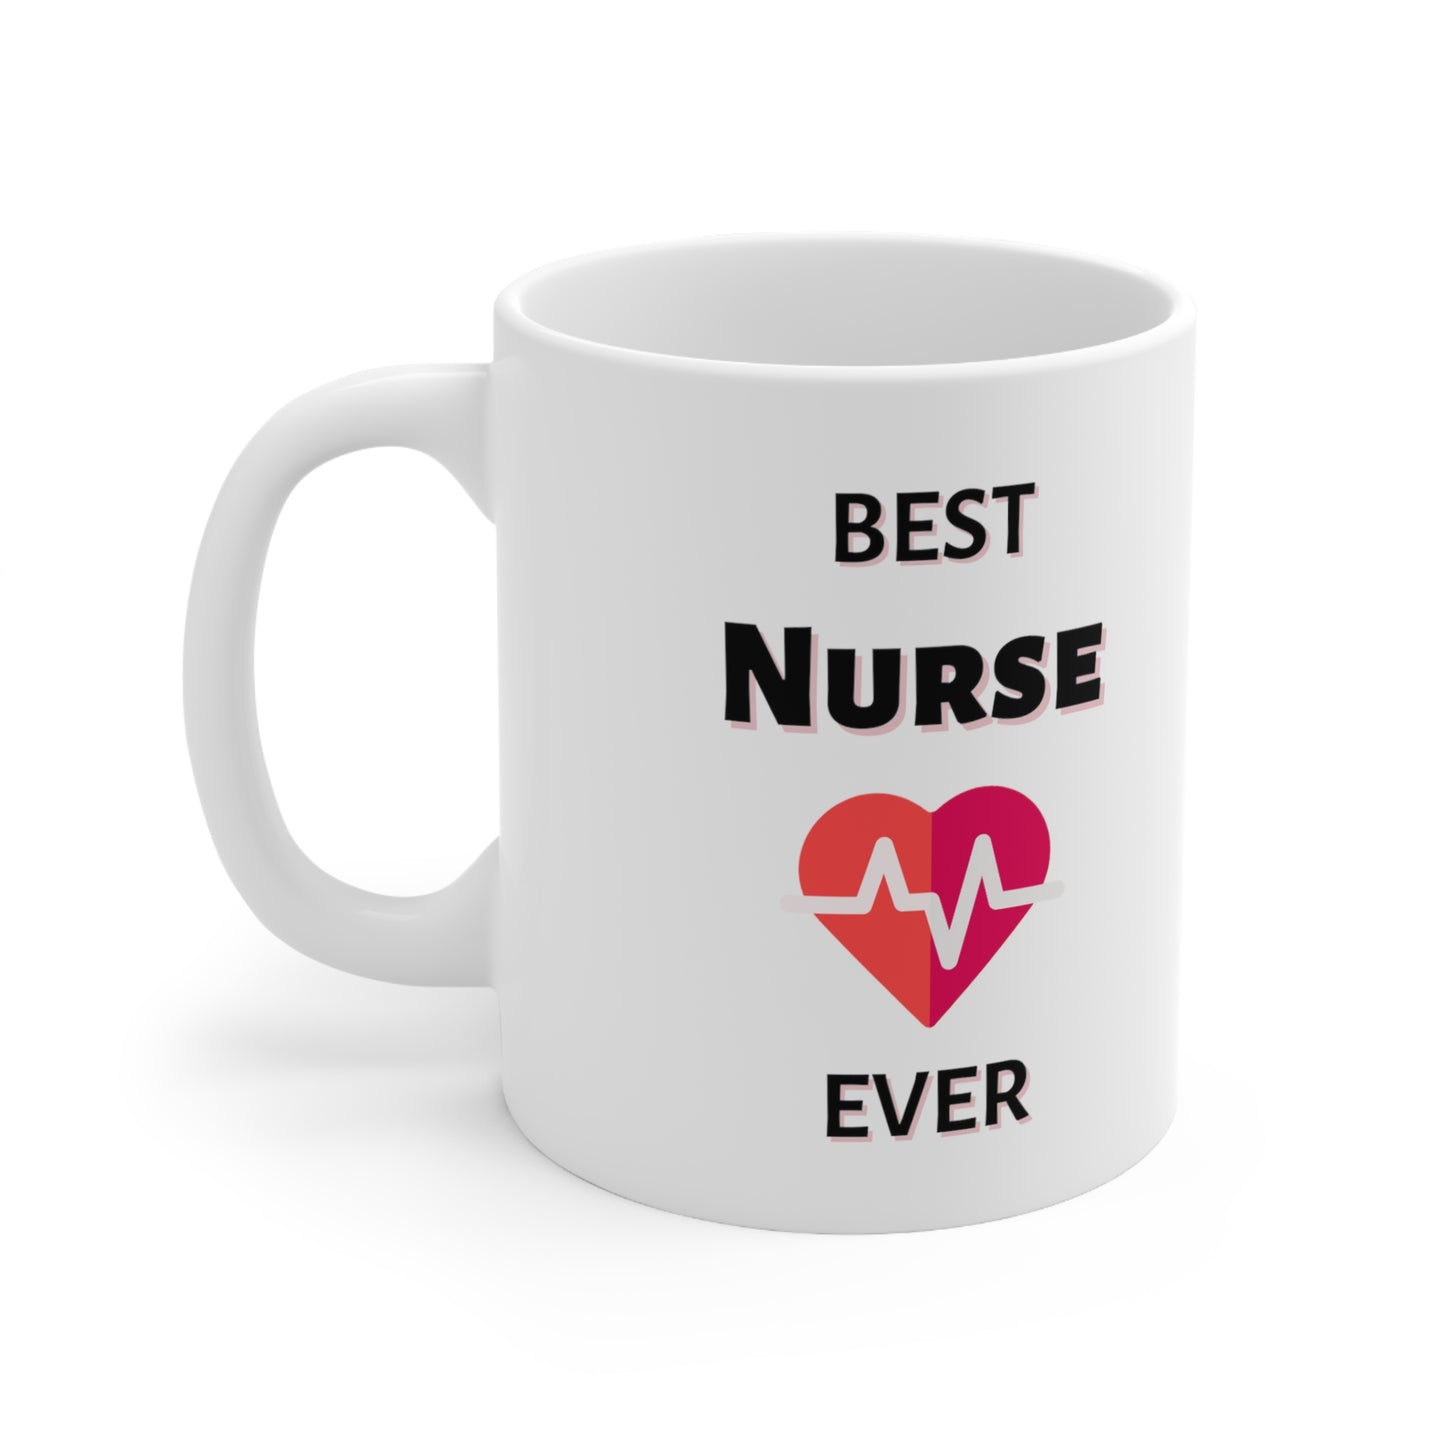 "Best Nurse Ever" Coffee Mug - Weave Got Gifts - Unique Gifts You Won’t Find Anywhere Else!